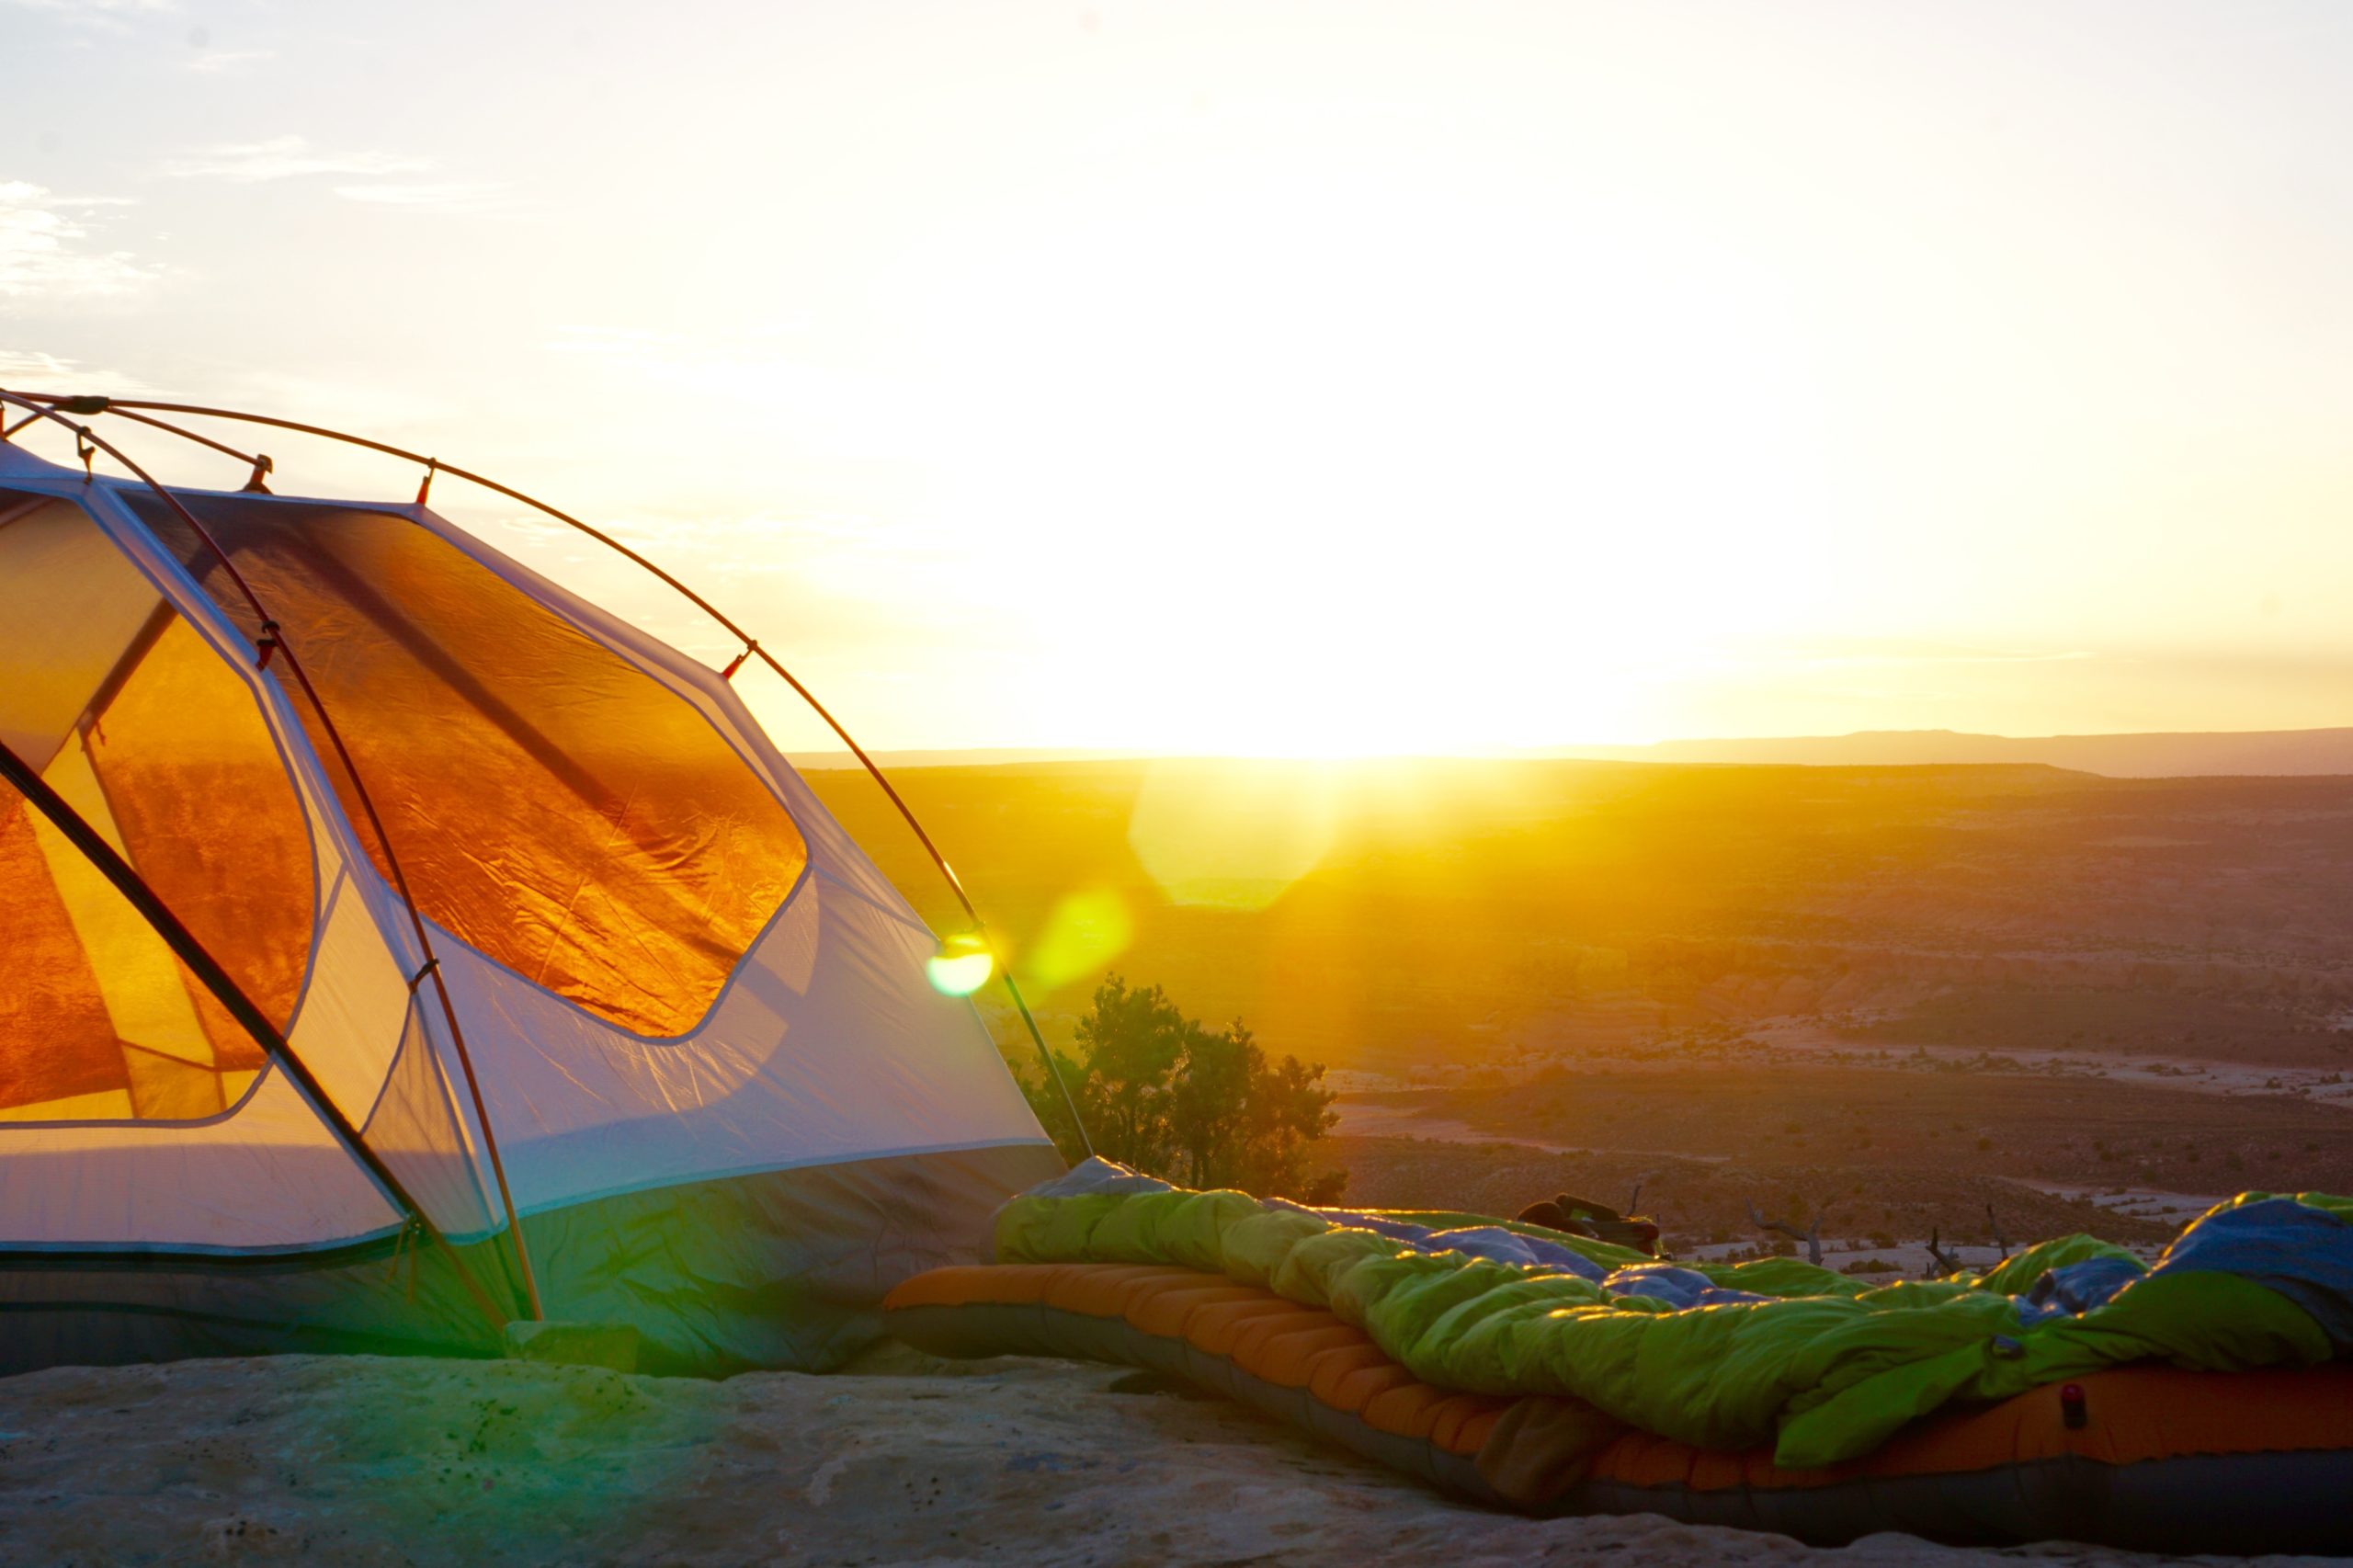 A tent with a sleeping bag and mat next to it in the desert.